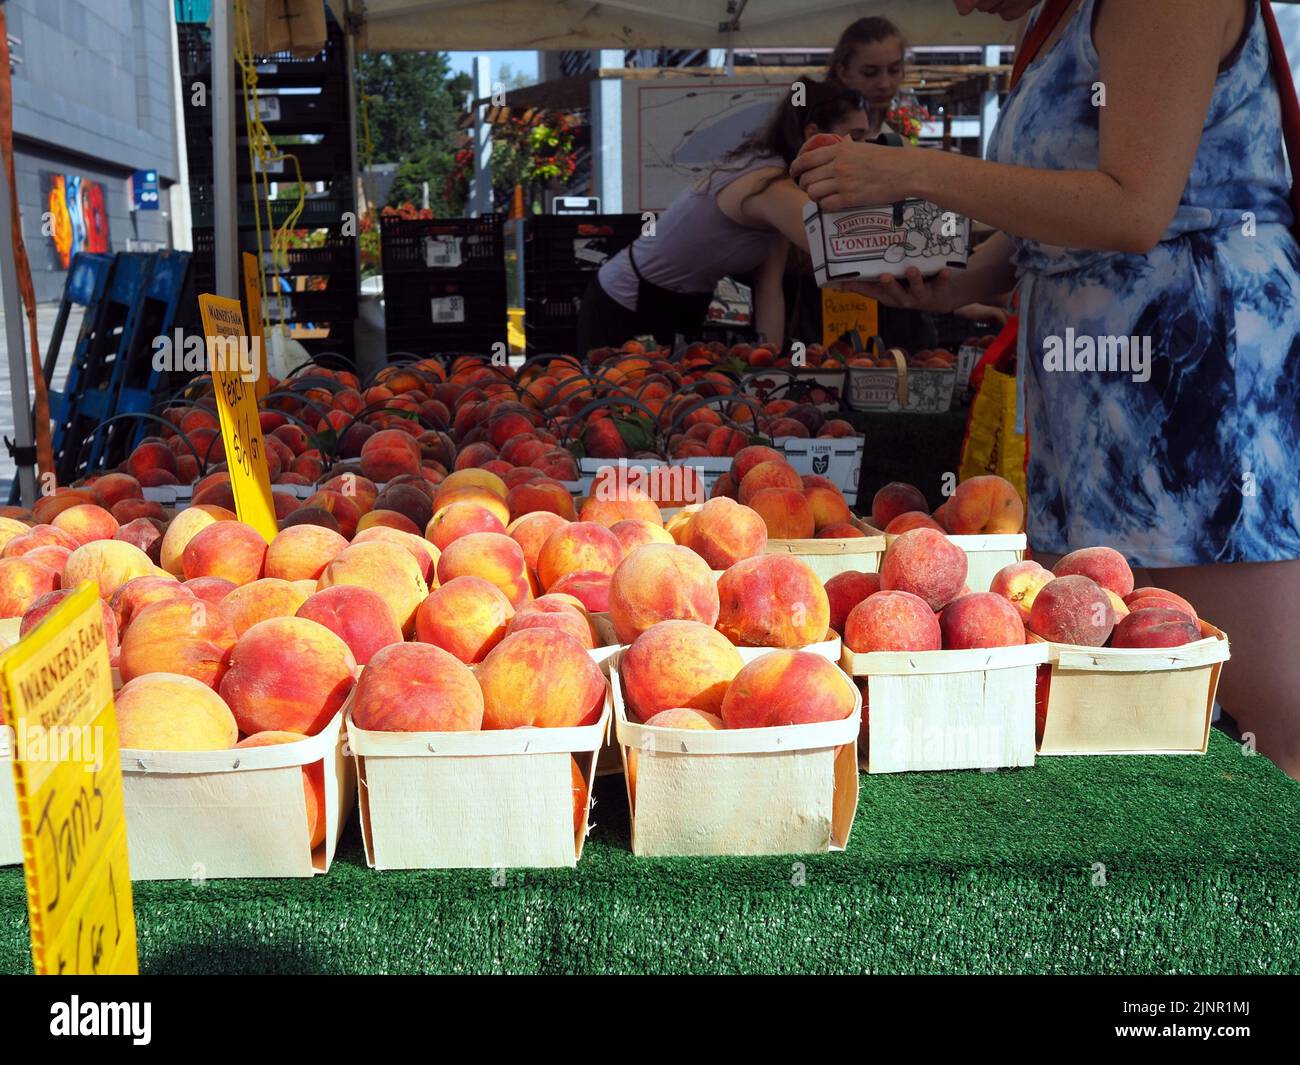 Scenes from the Farmer's Market at Lansdowne Place. Fresh local peach stand. Ottawa, ON, Canada. Stock Photo